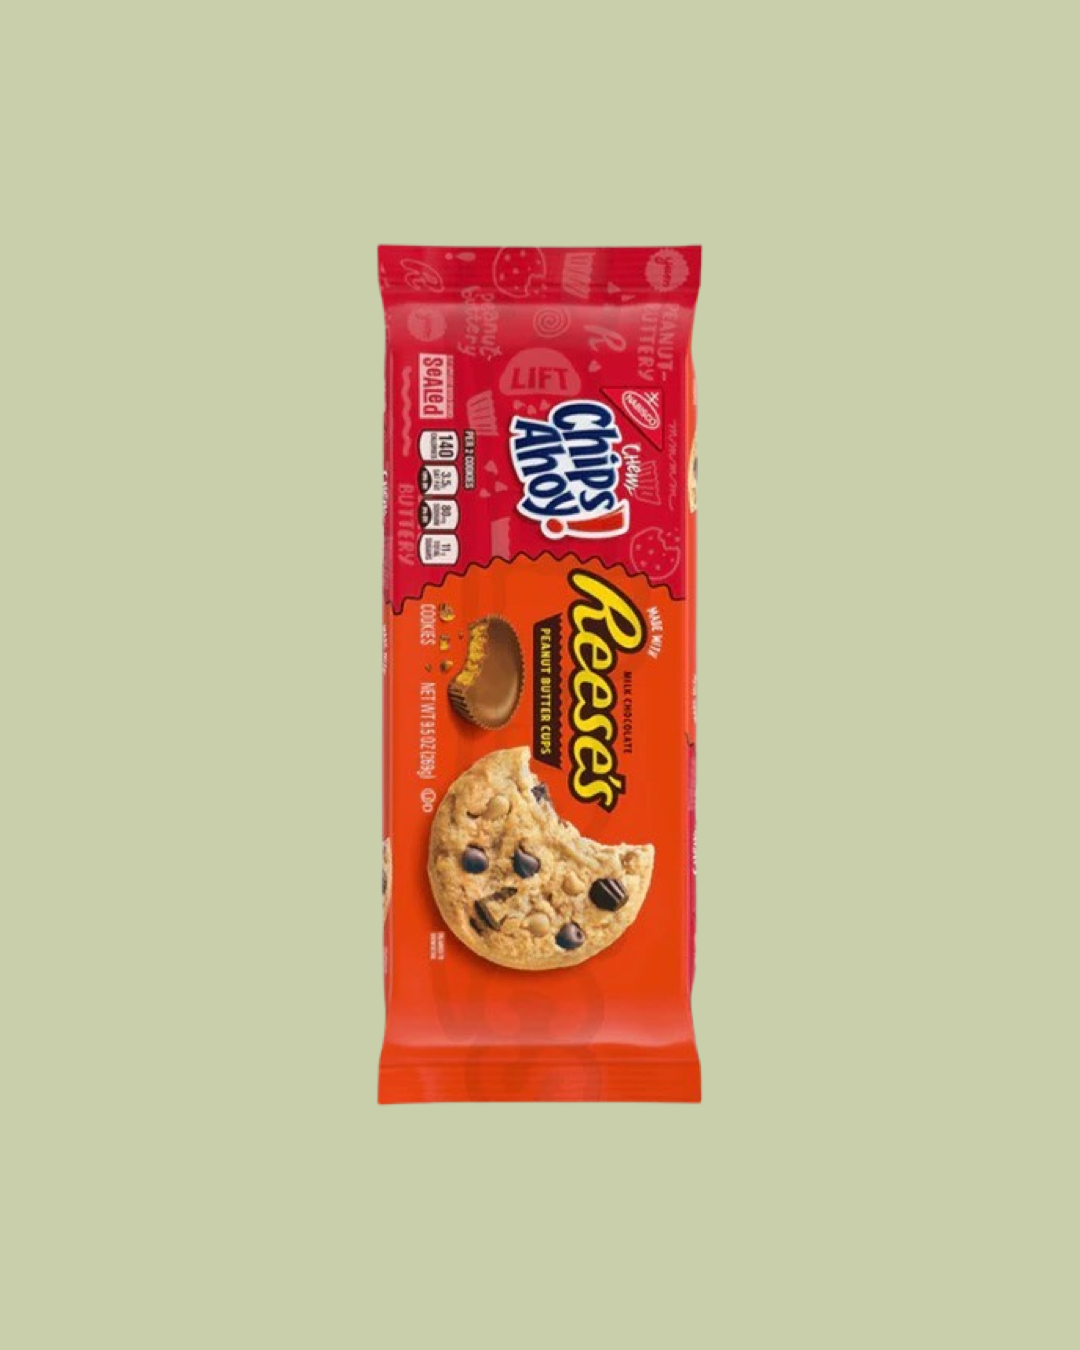 Chips Ahoy! Chewy with Reese's Peanut Butter Cup